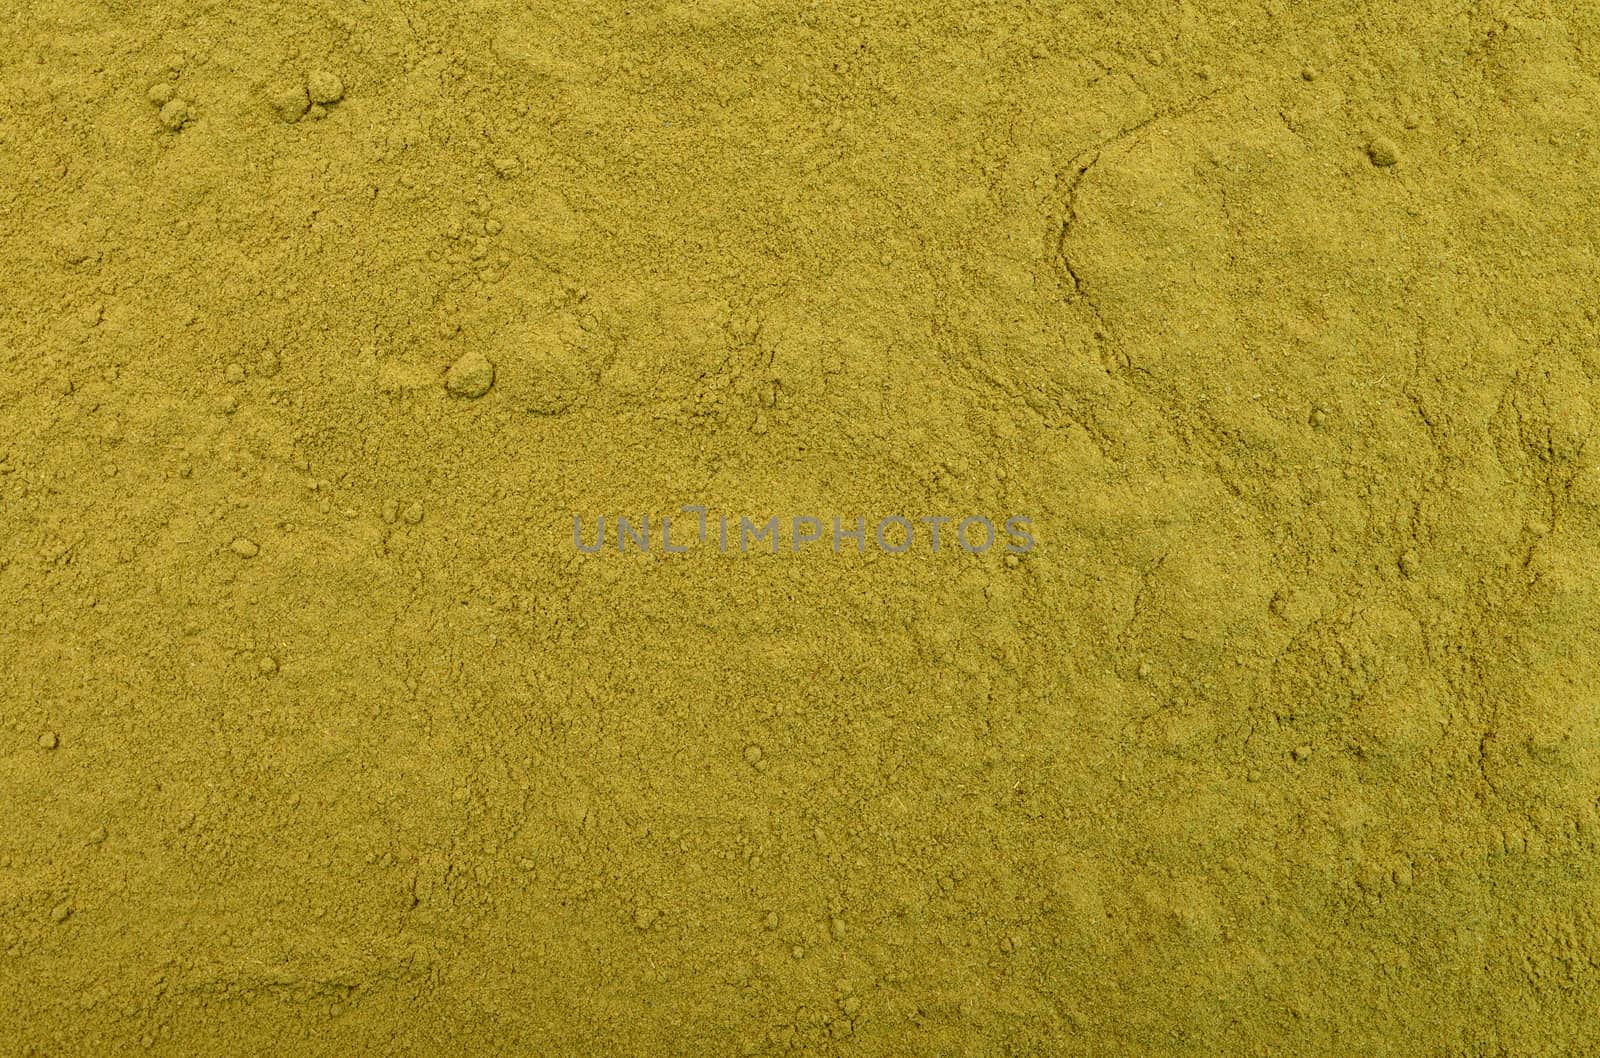 dry dehydrated rosemary powder condiment texture pattern